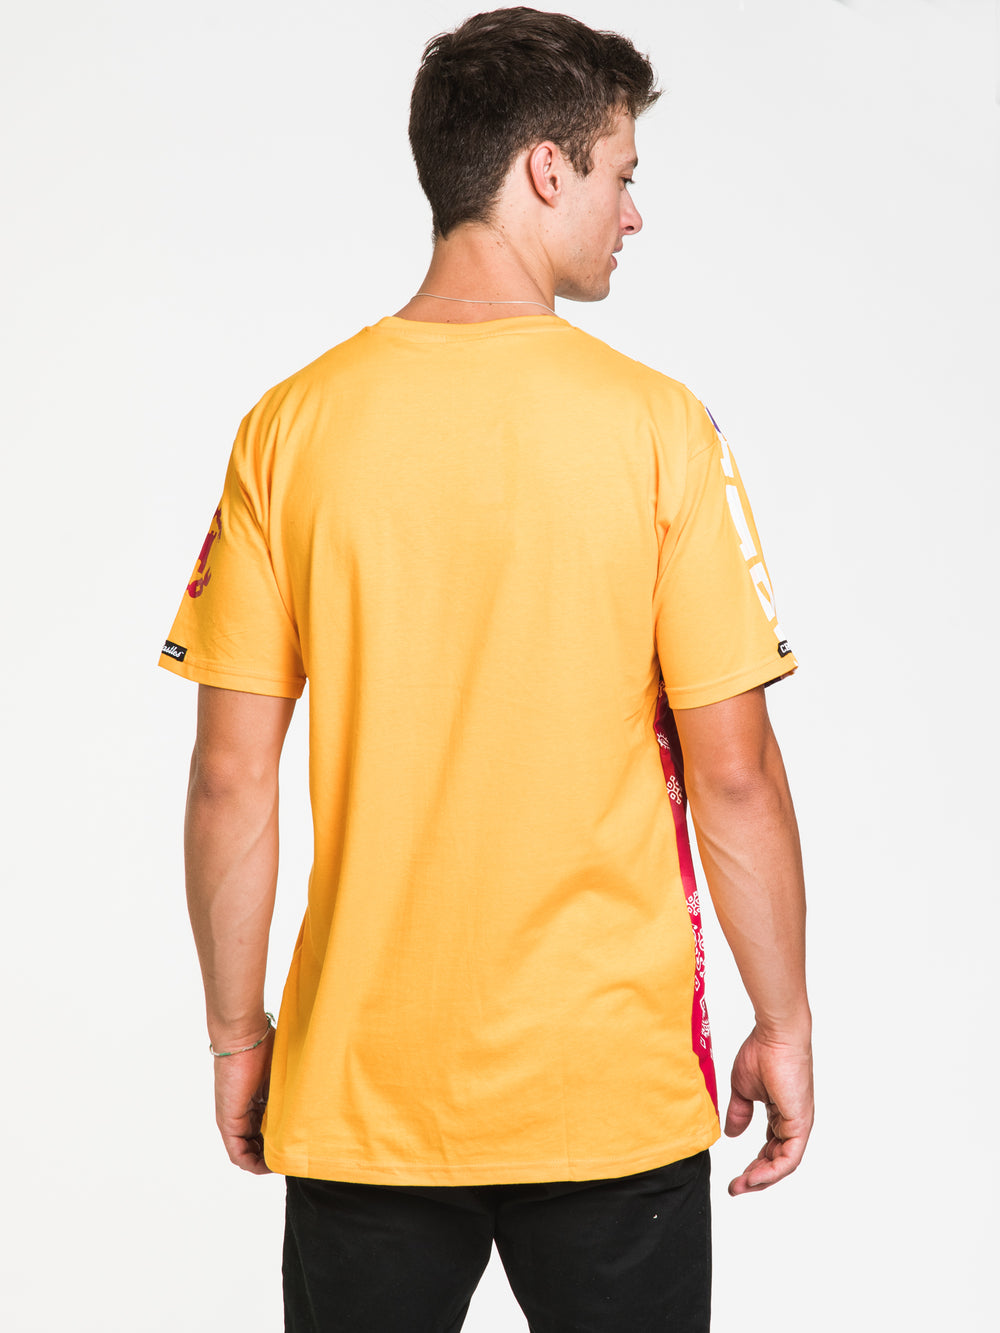 CROOKS & CASTLES GRECO BANDITO OVER SIZED T-SHIRT - DÉSTOCKAGE